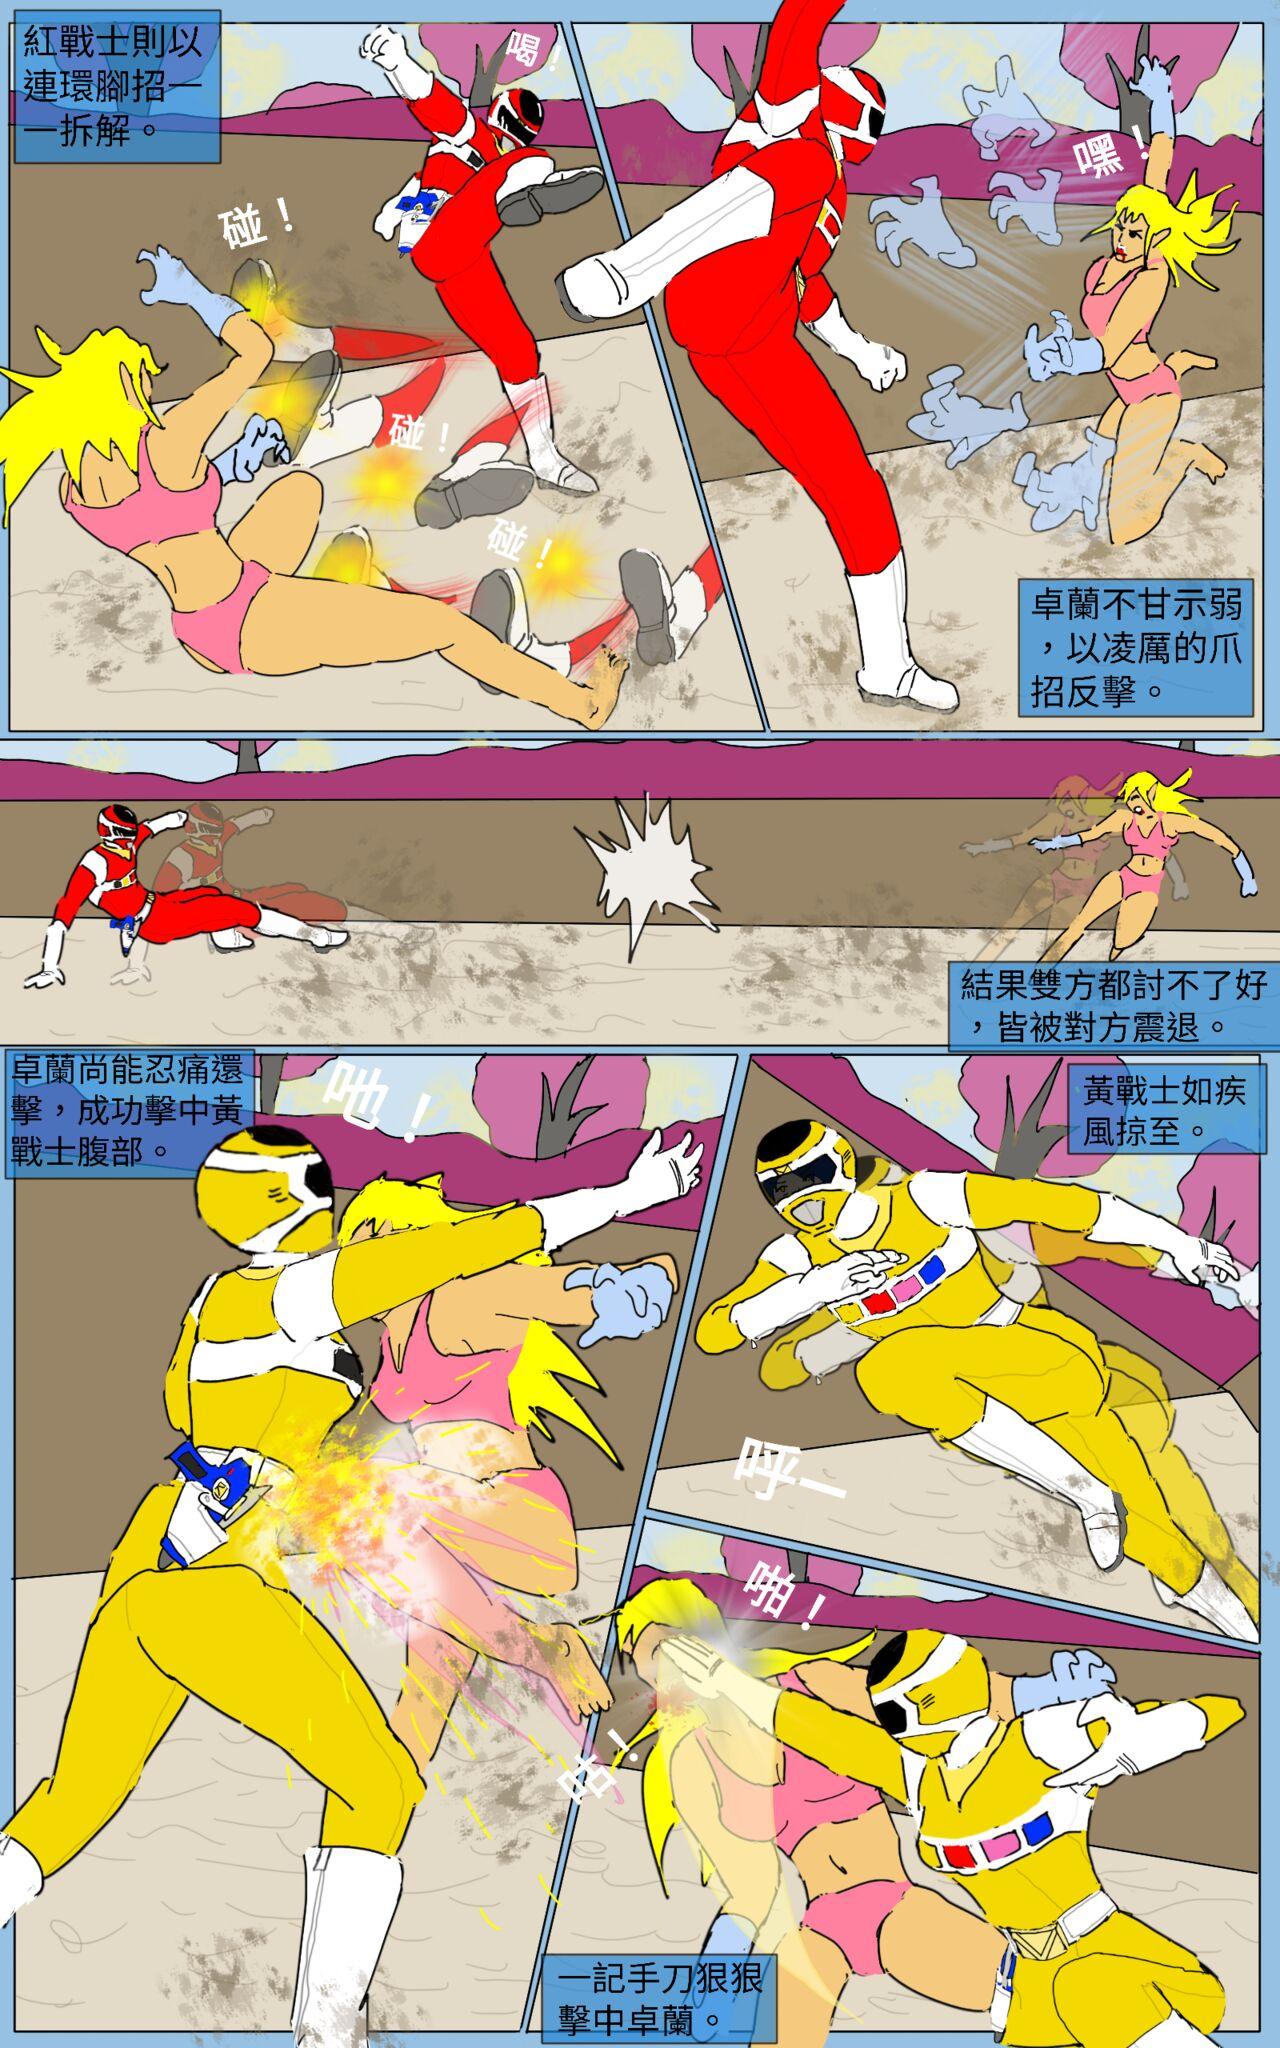 Old And Young Mission 29 - Super sentai Porno Amateur - Page 2